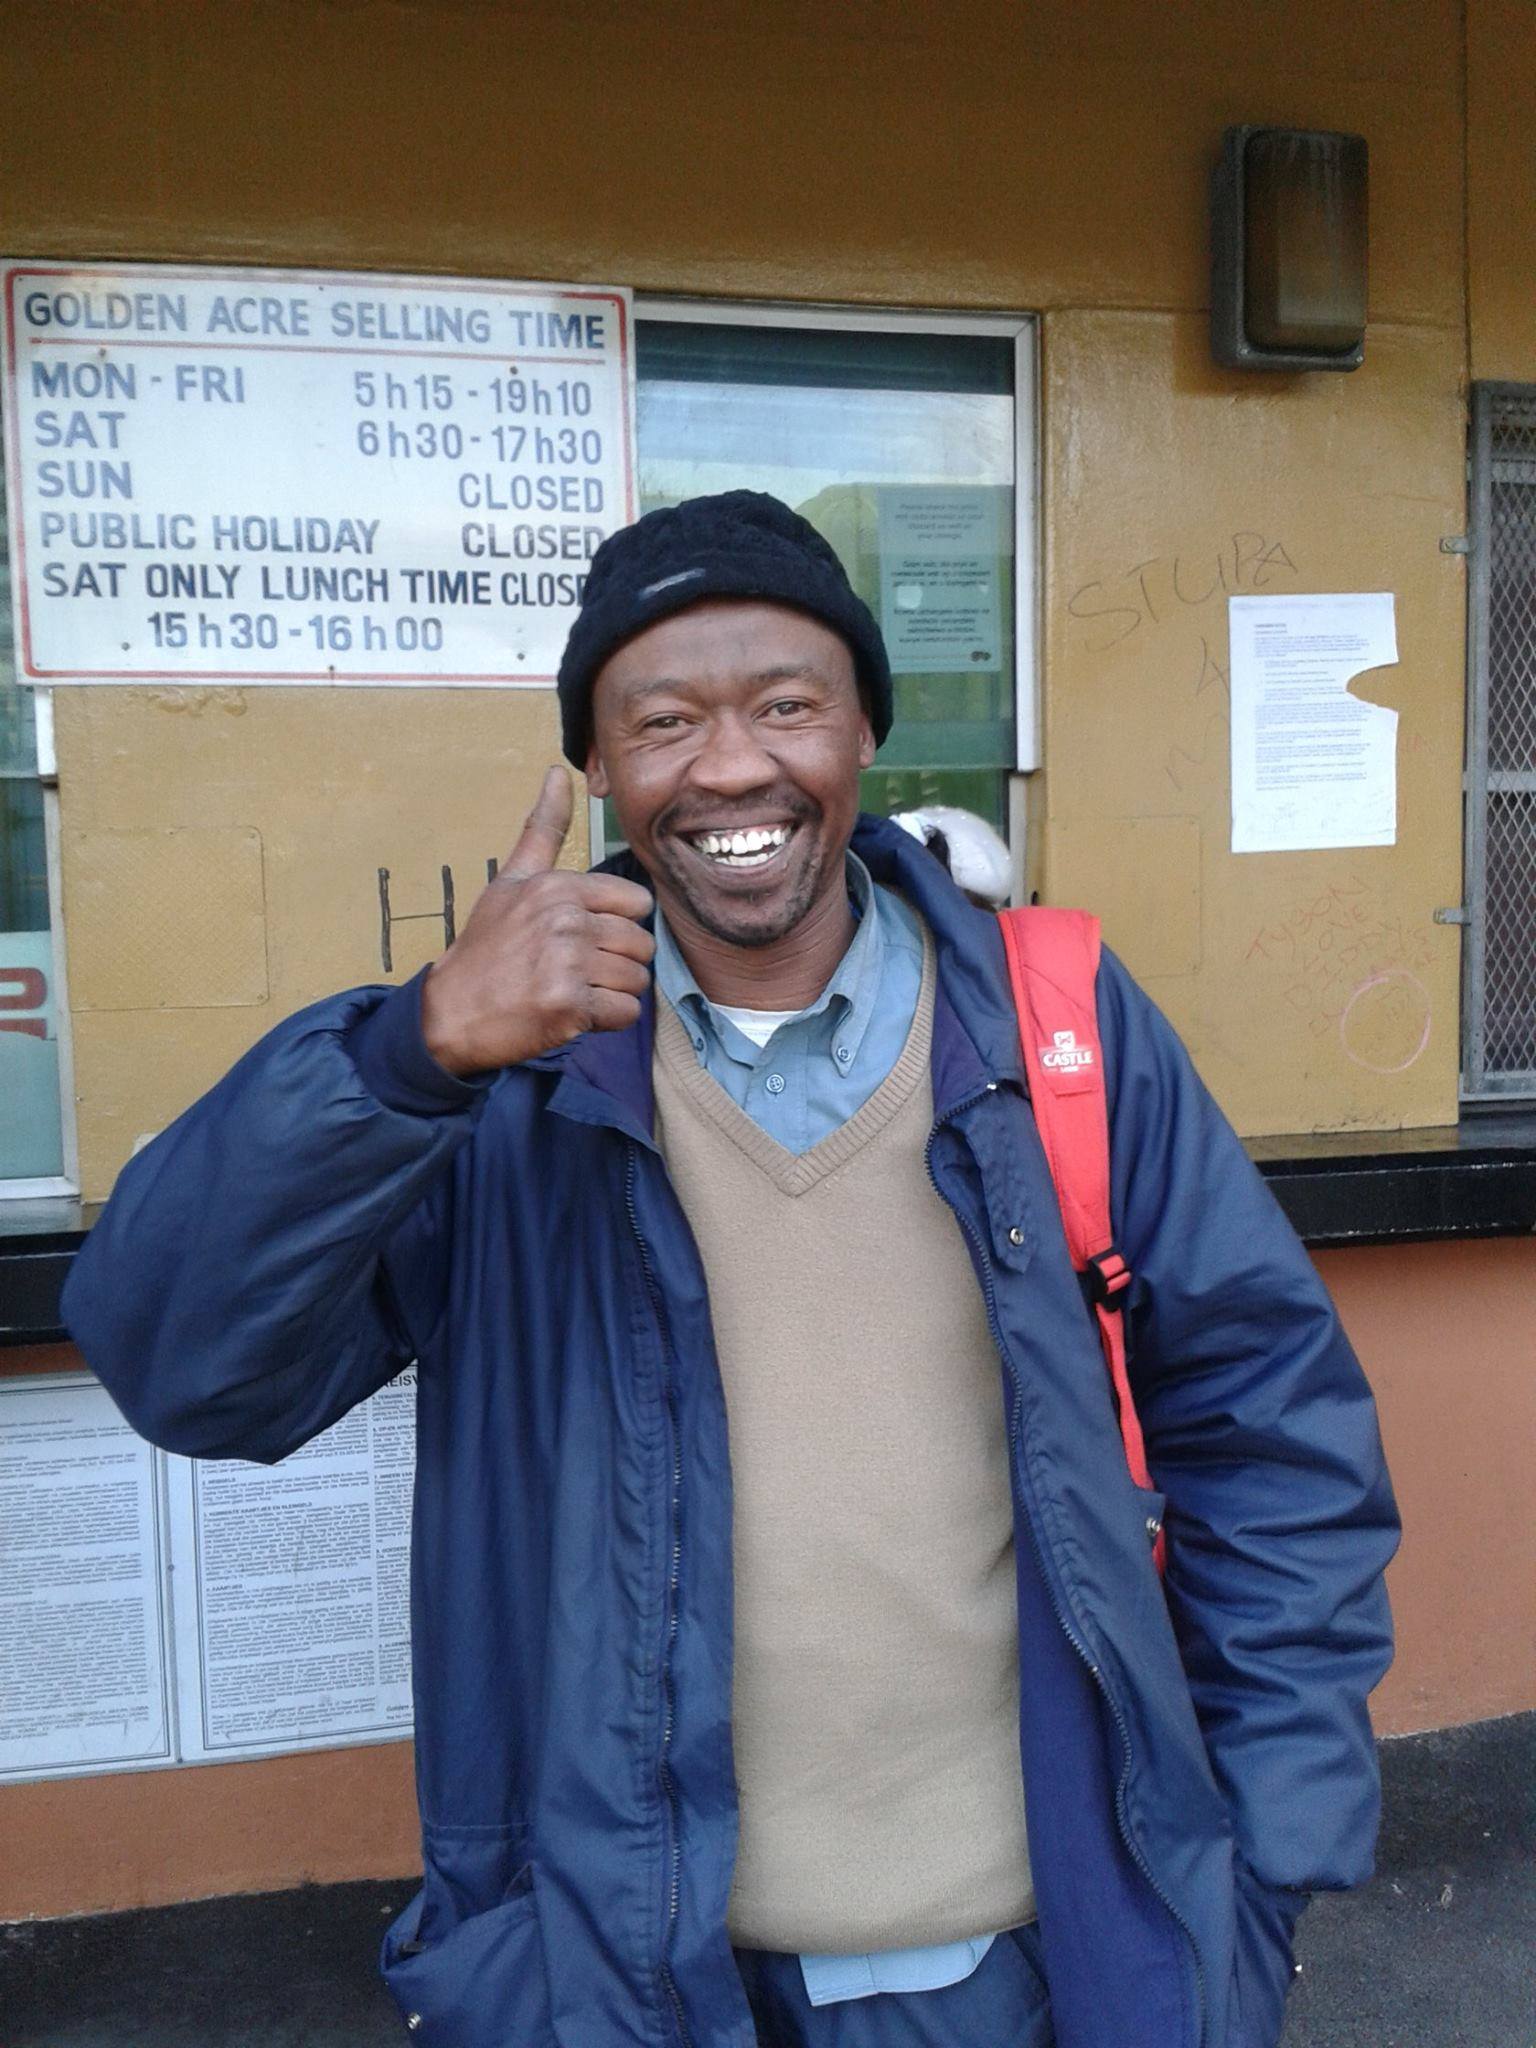 Bus driver returns lost cellphone, reignites passion for South Africa!